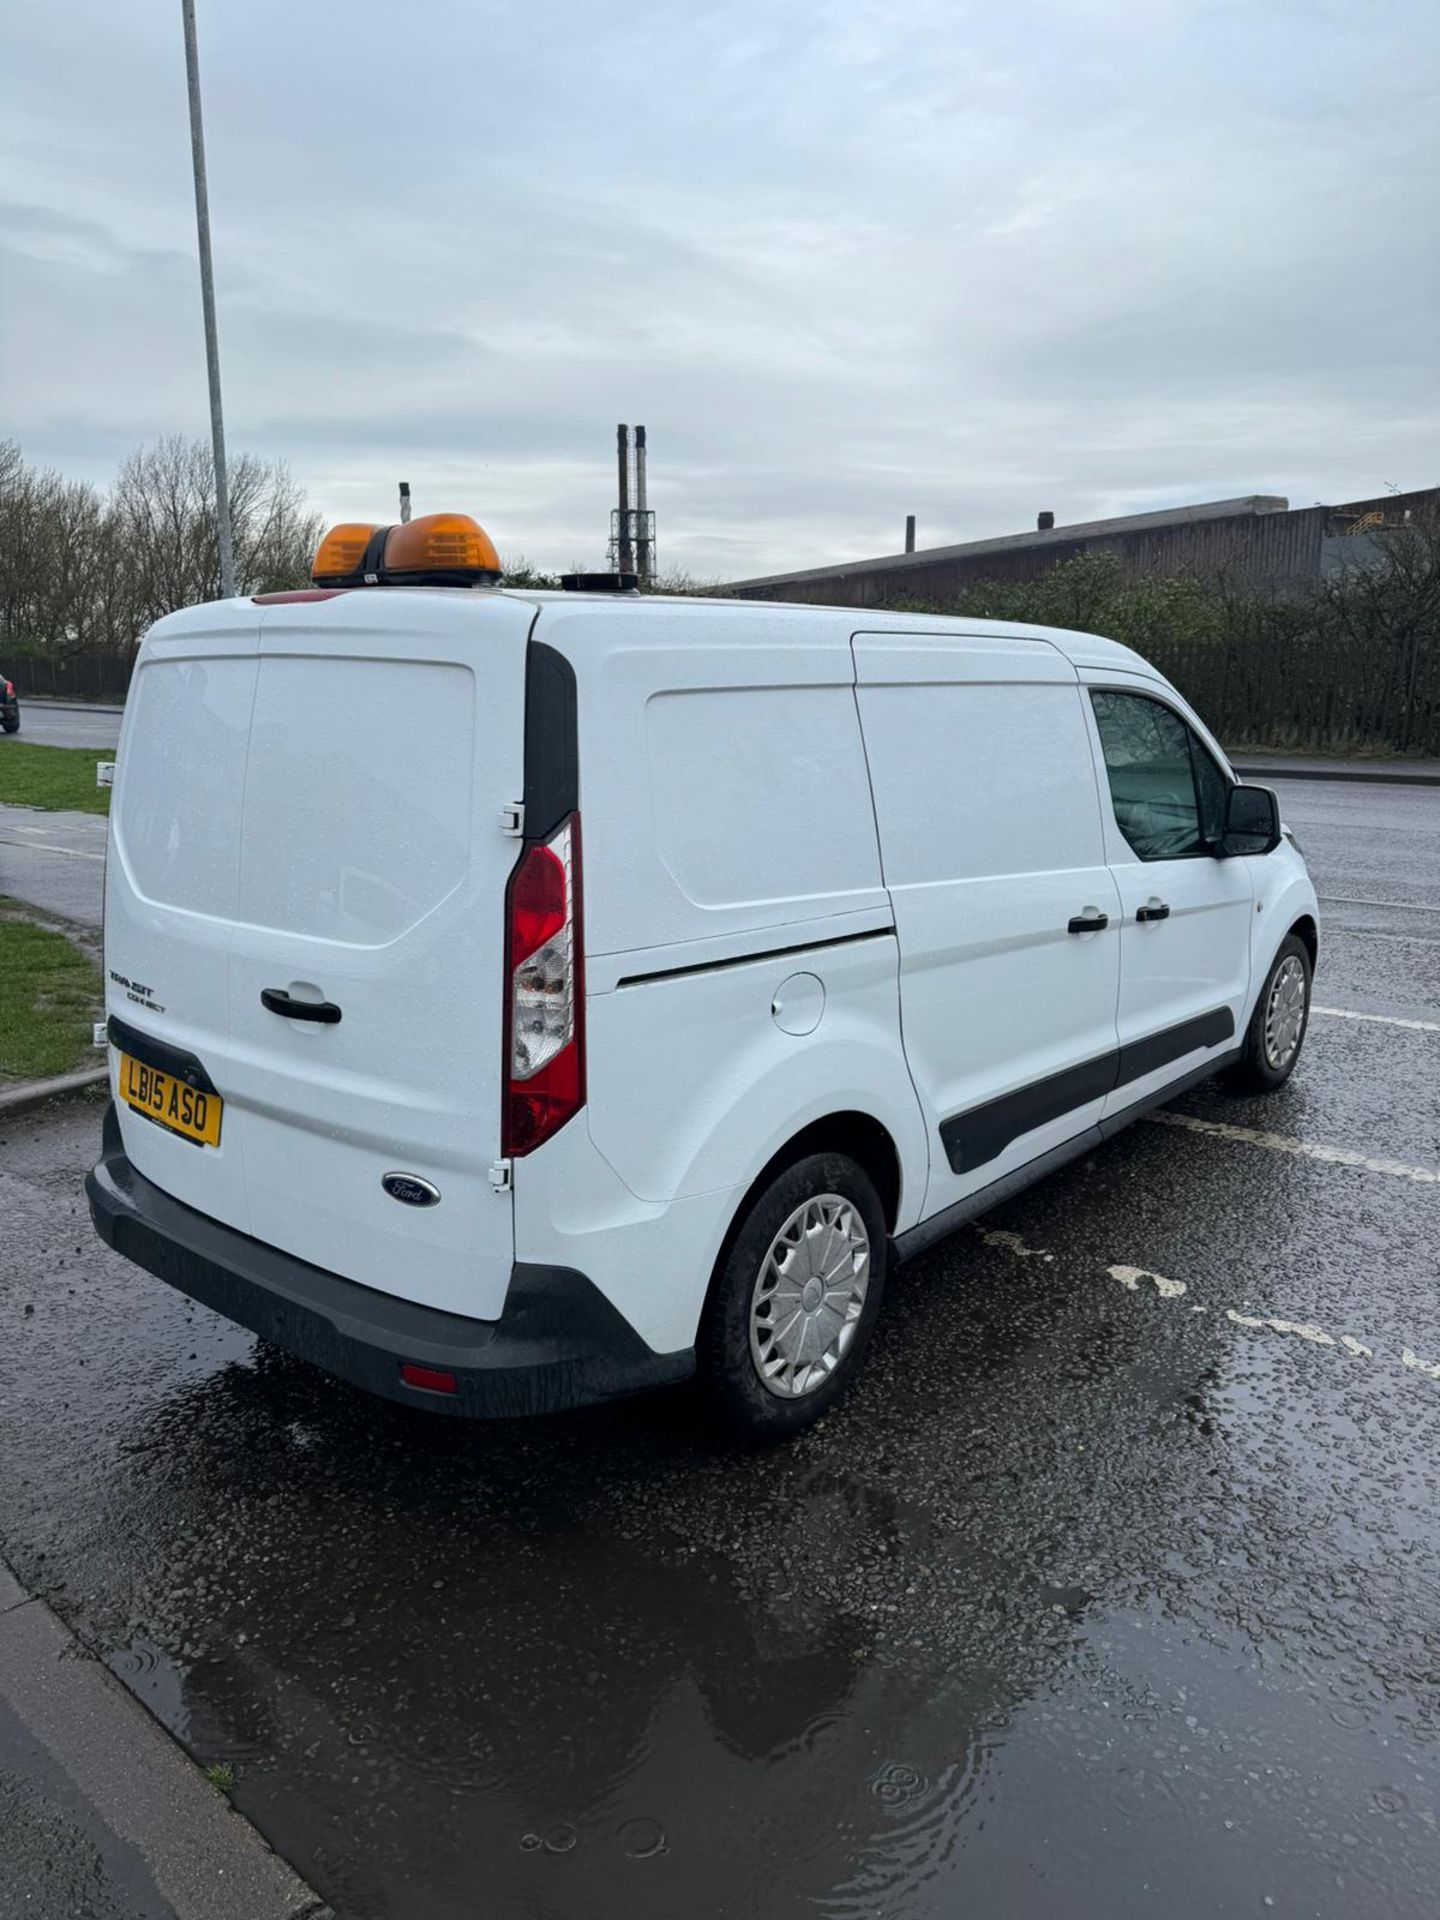 2015 15 FORD TRANSIT CONNECT LWB PANEL VAN - 95K MILES - AIR CON - TWIN SIDE DOORS - EX WATER BOARD - Image 11 of 11